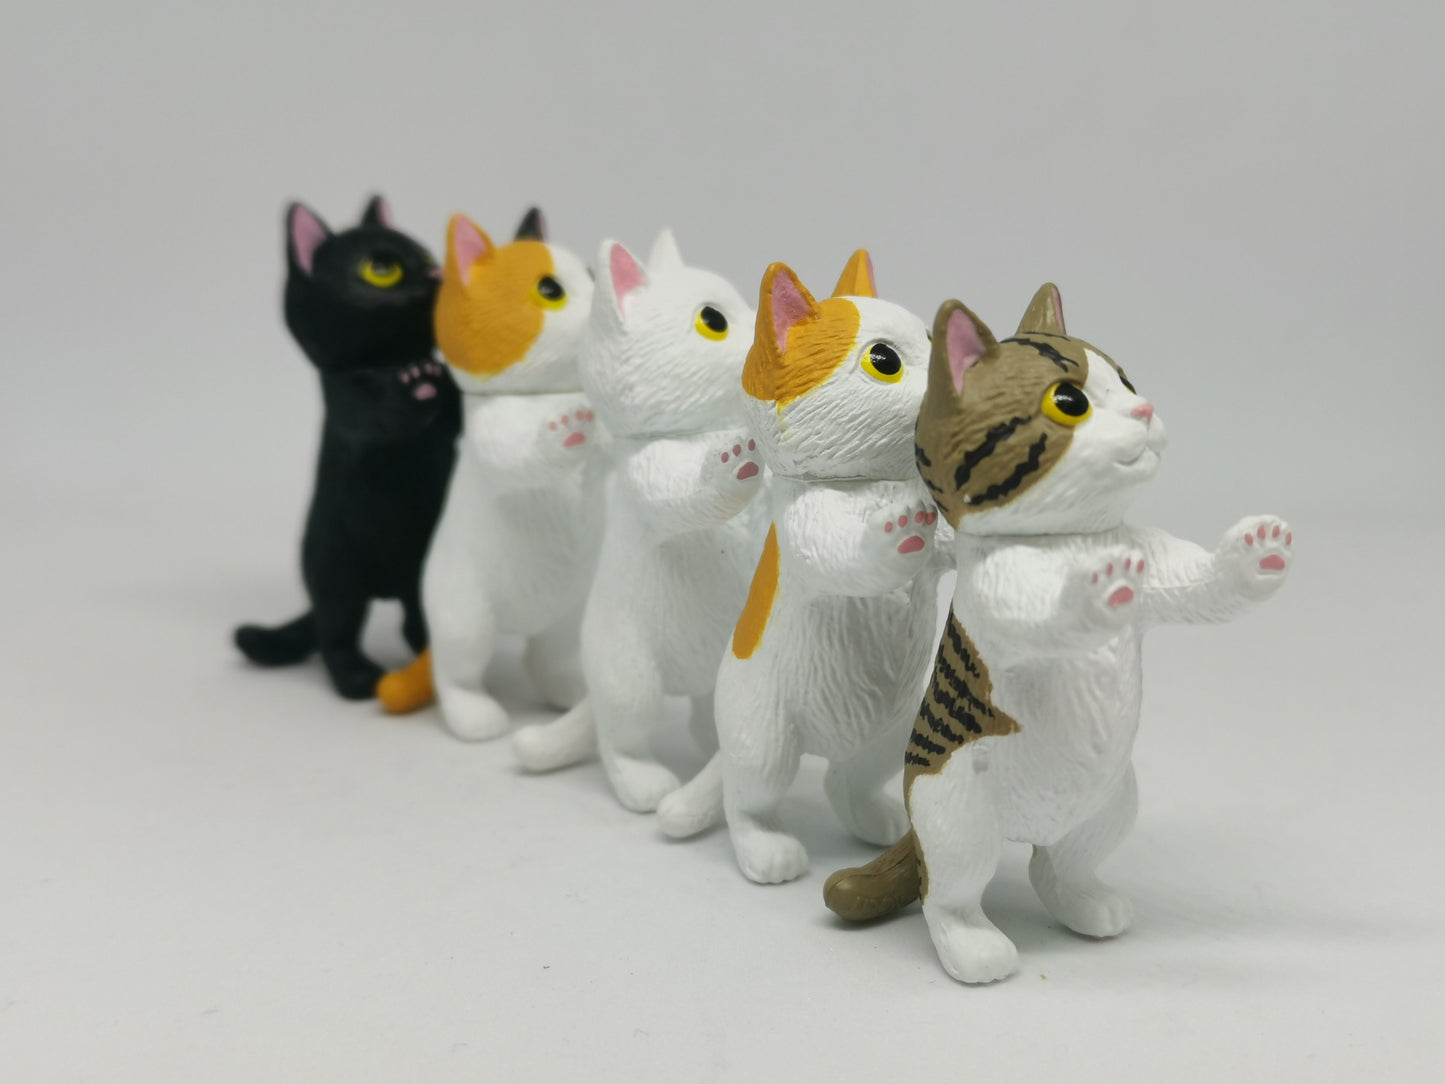 Kitan Club Touching Cat Capsule Gashapon Toy Complete Figures set of 5